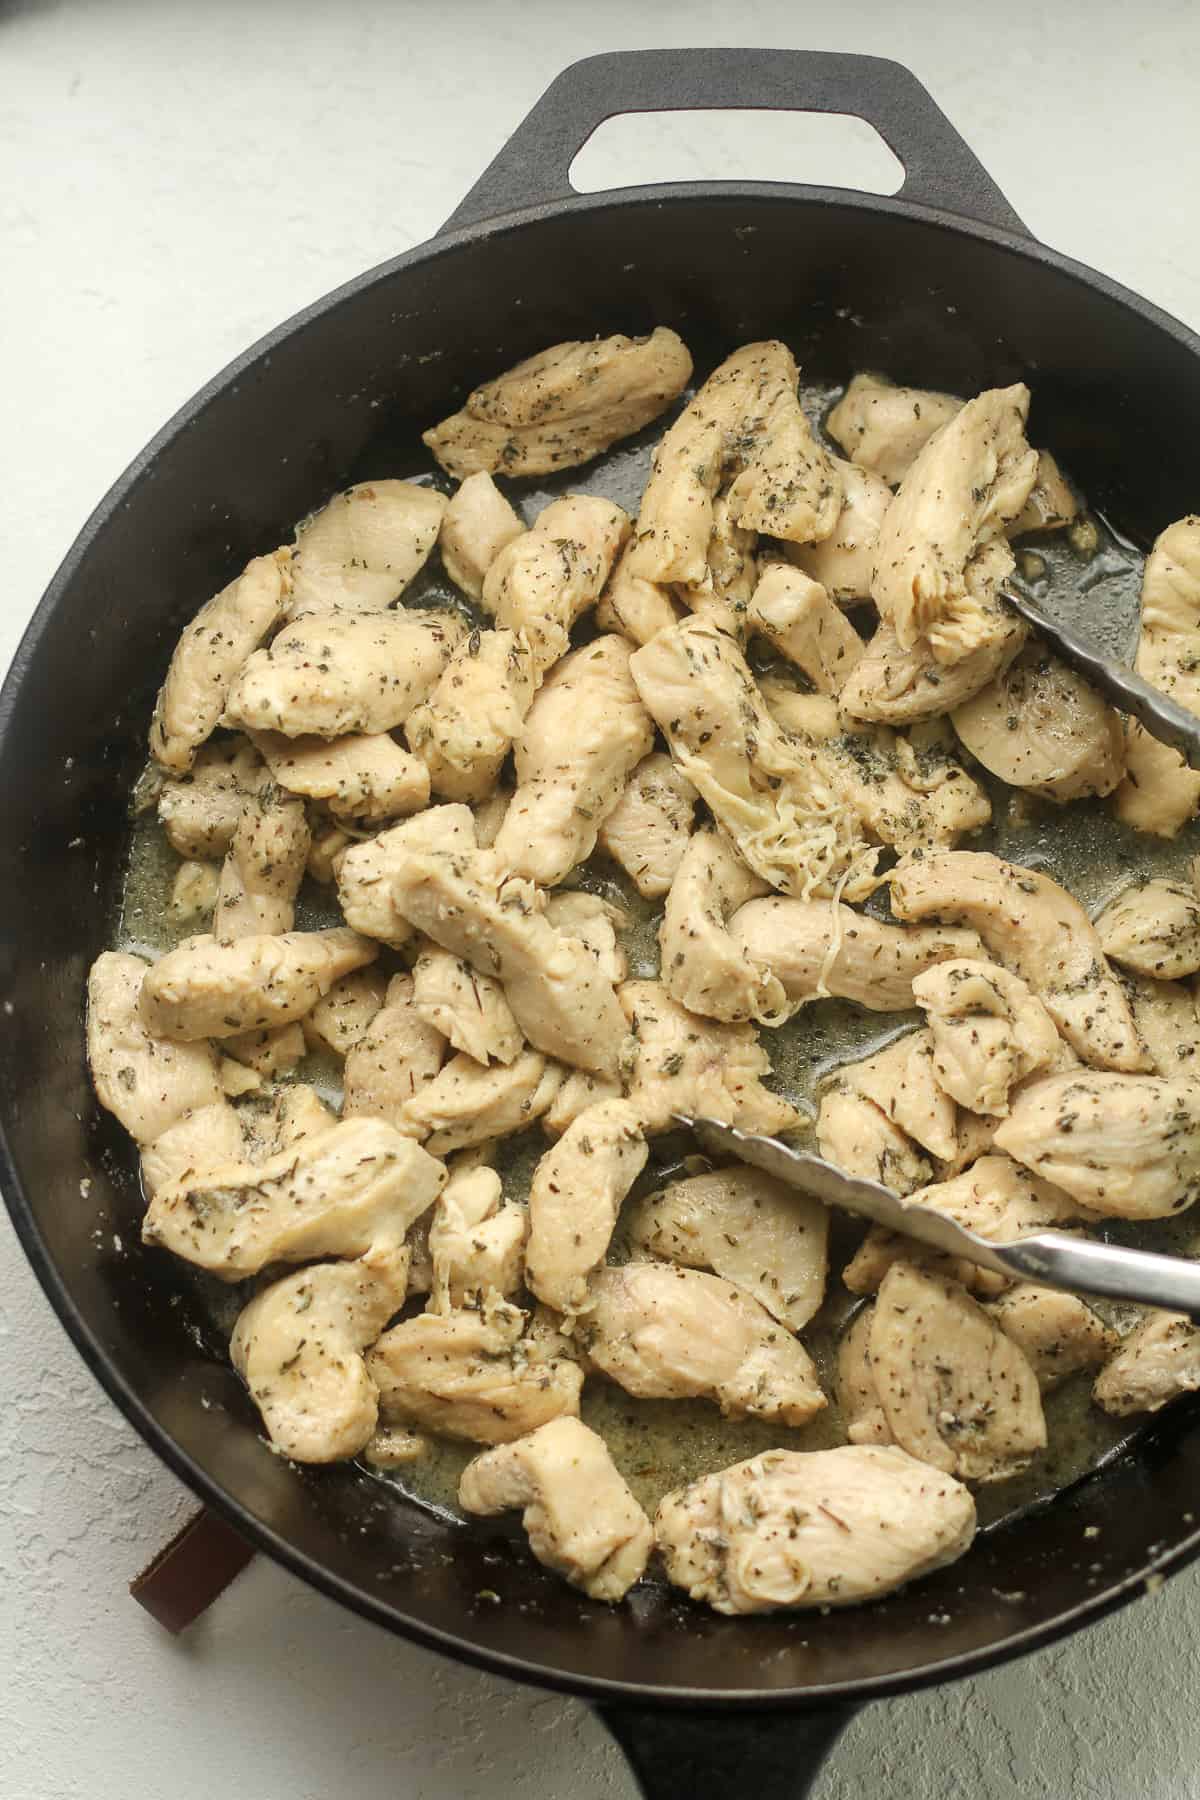 A skillet of sauteed sliced chicken.